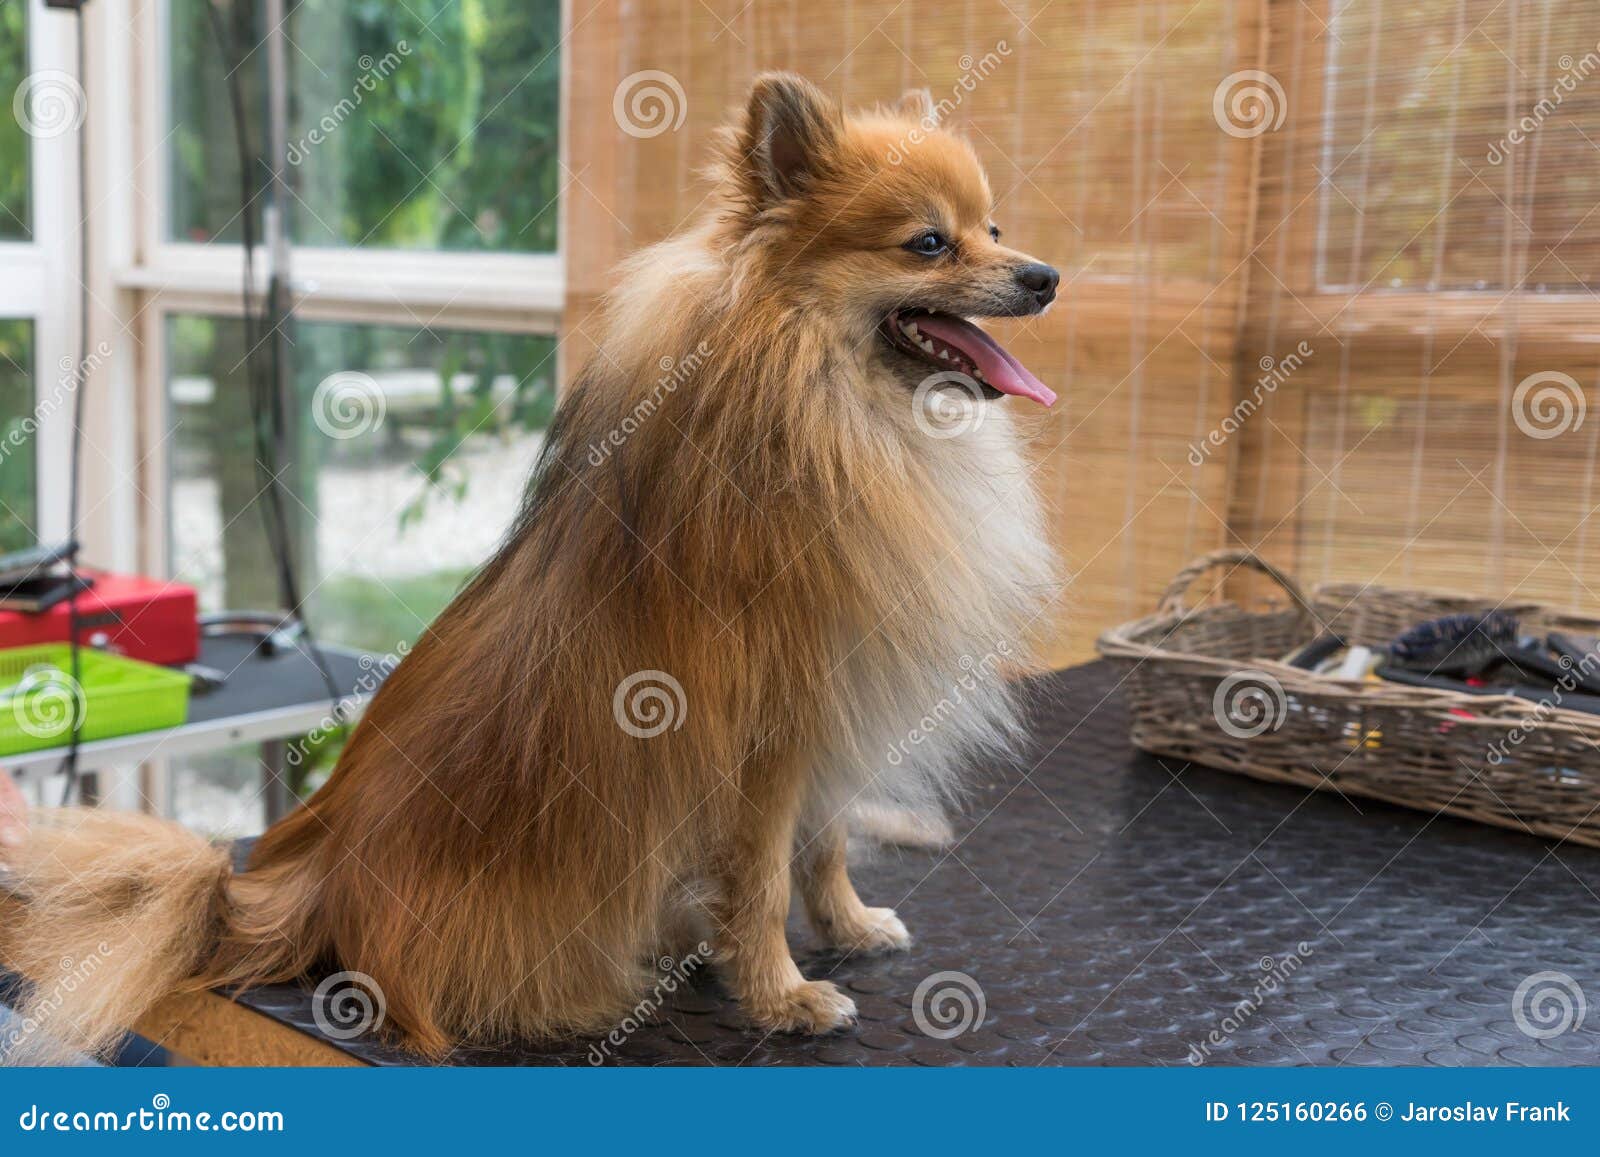 Cute Pomeranian German Spitz Dog Is Sitting On The Grooming Table Stock Photo Image Of Comb Adorable 125160266